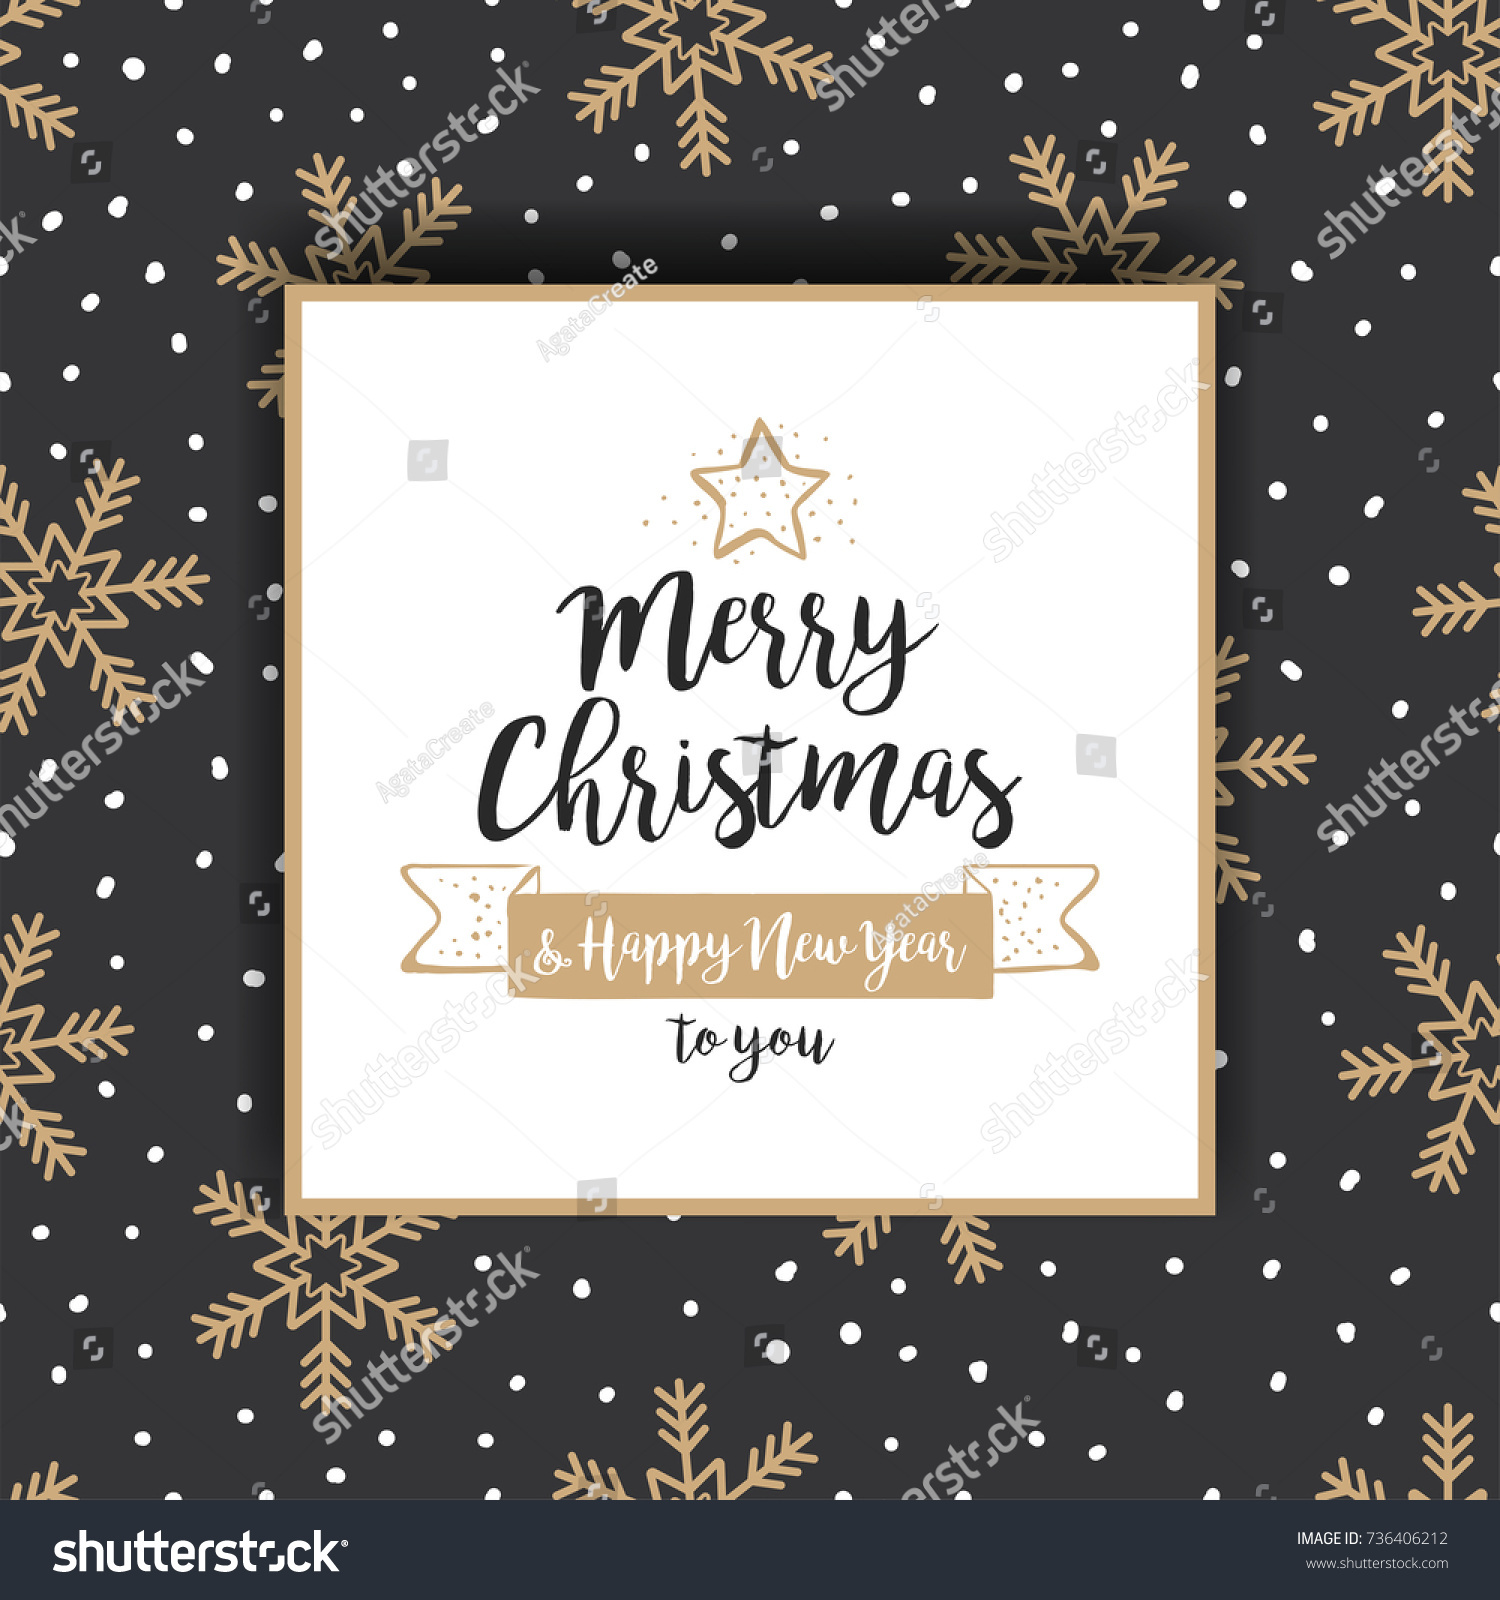 Christmas background with golden snowflakes and greetings